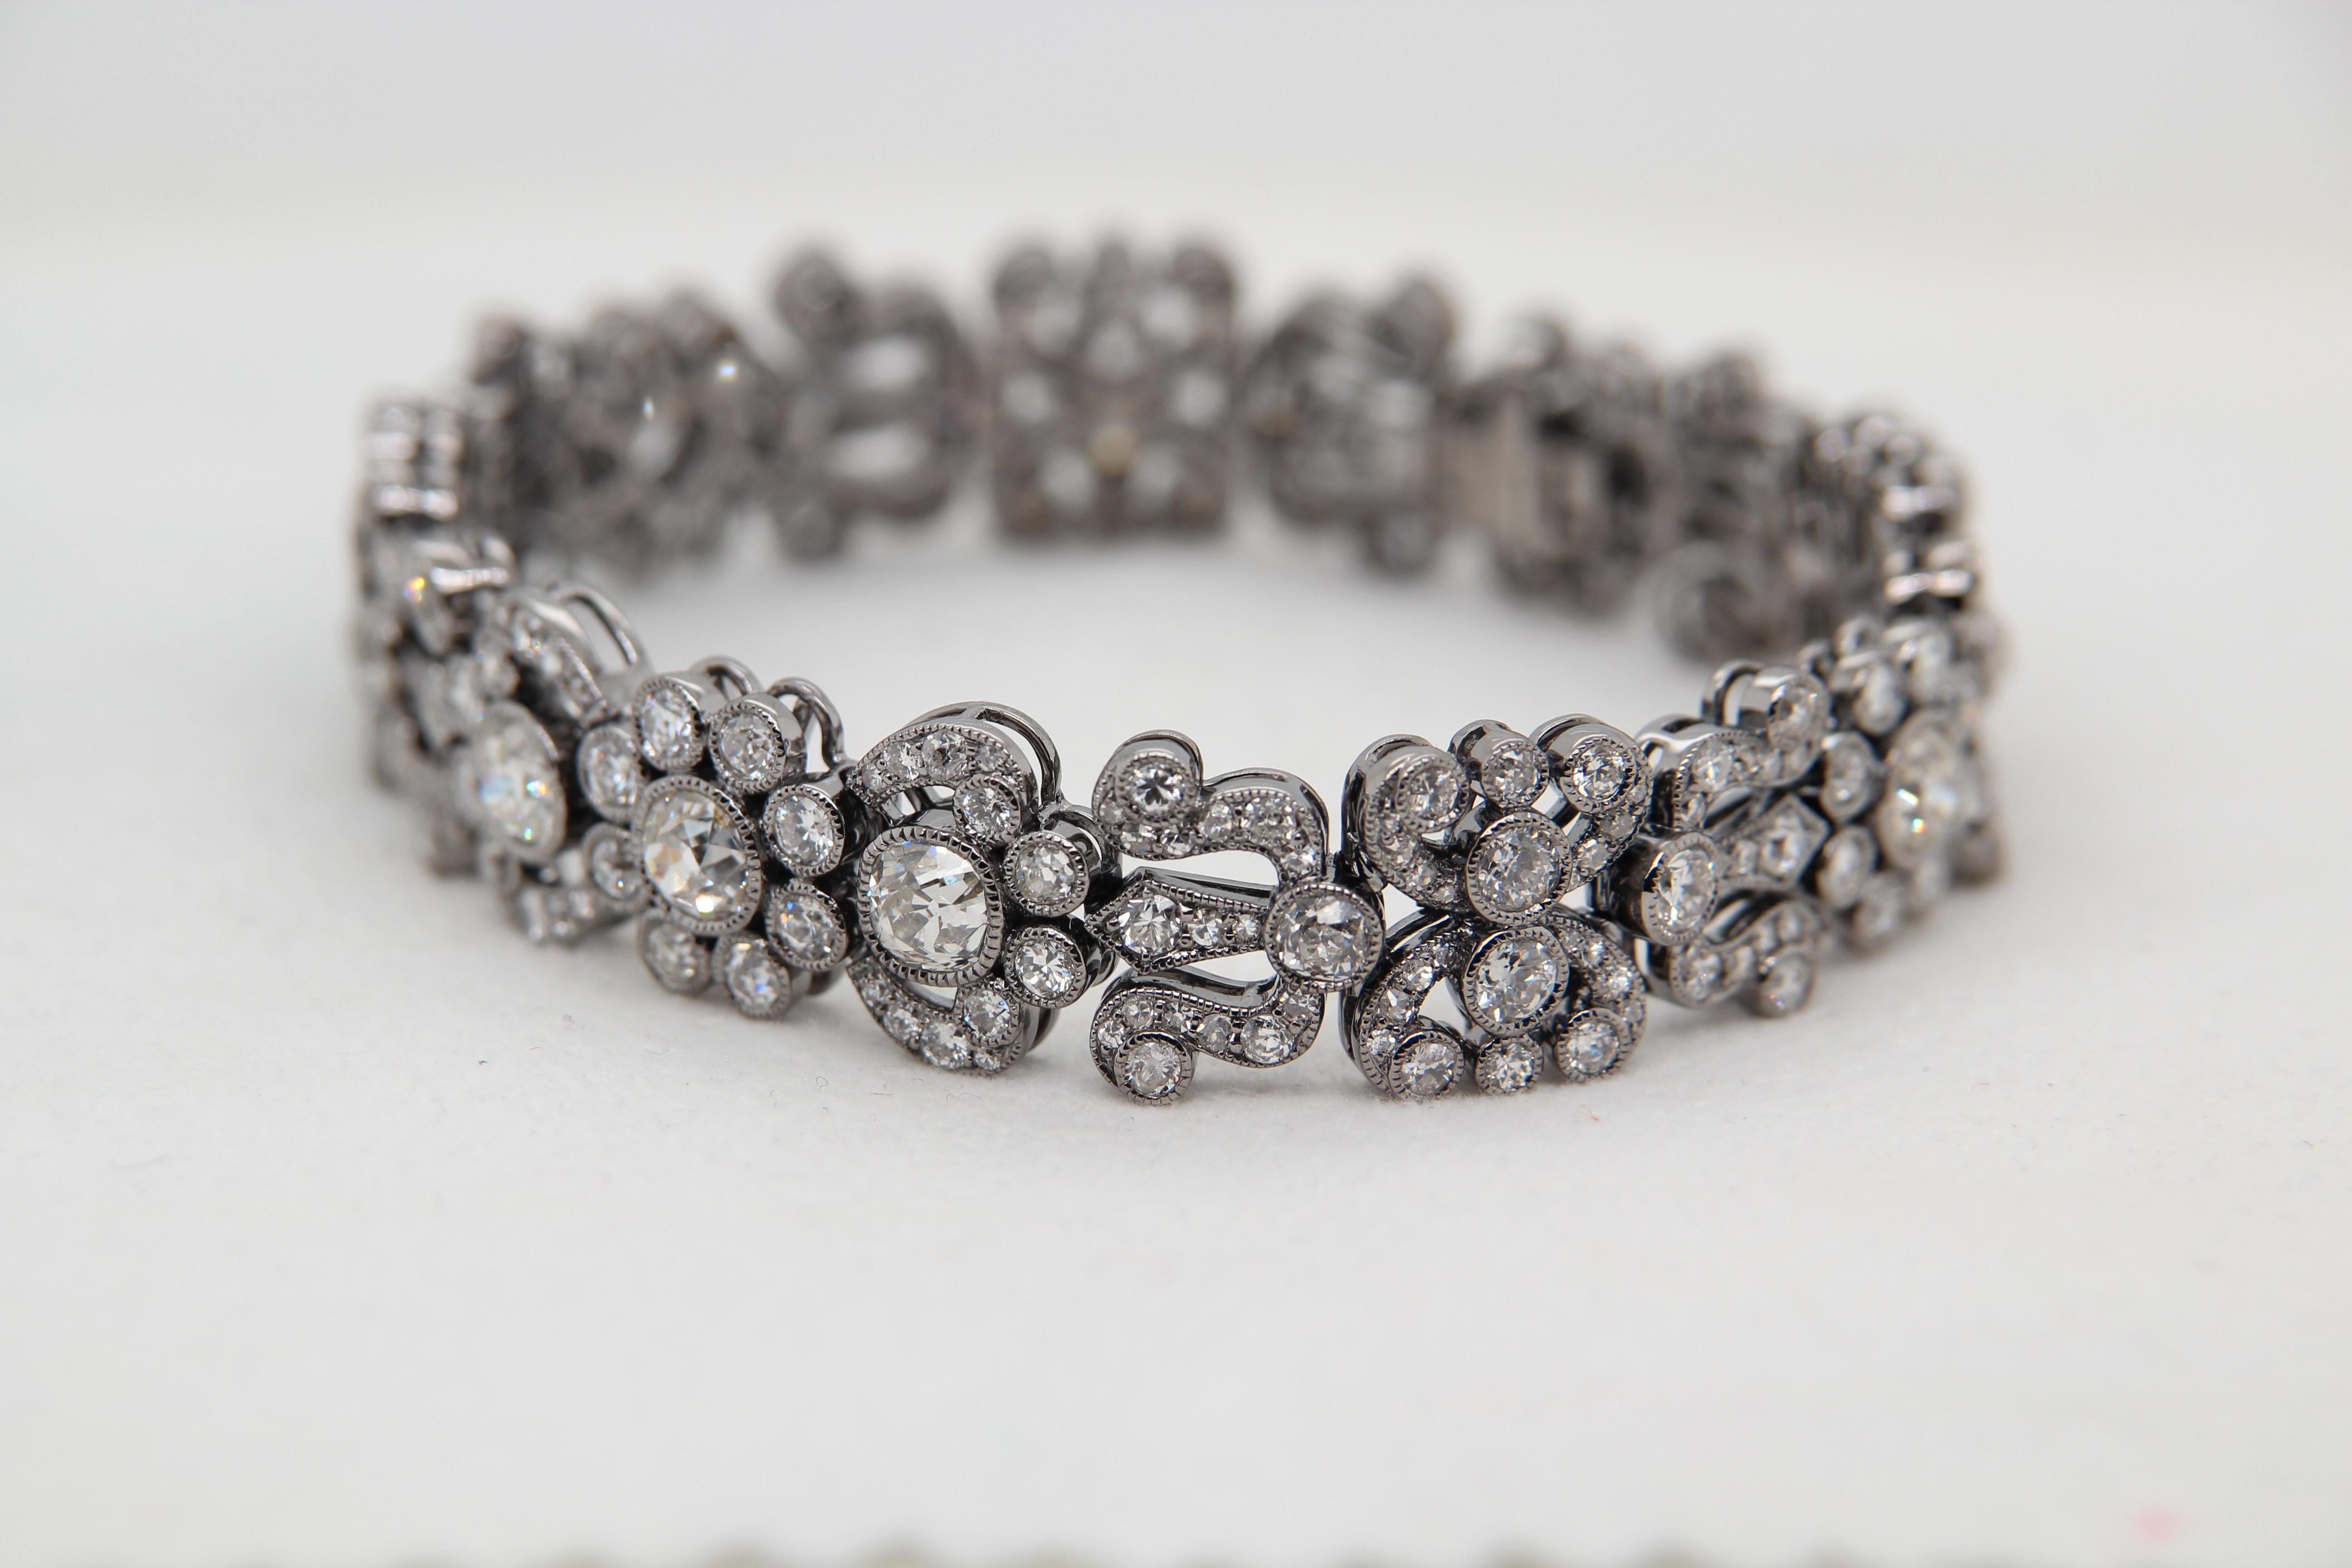 A new antique style bracelet with old cut diamonds. The total diamond weight is 12.34 carat and the total bracelet weight is 36.04 grams. 